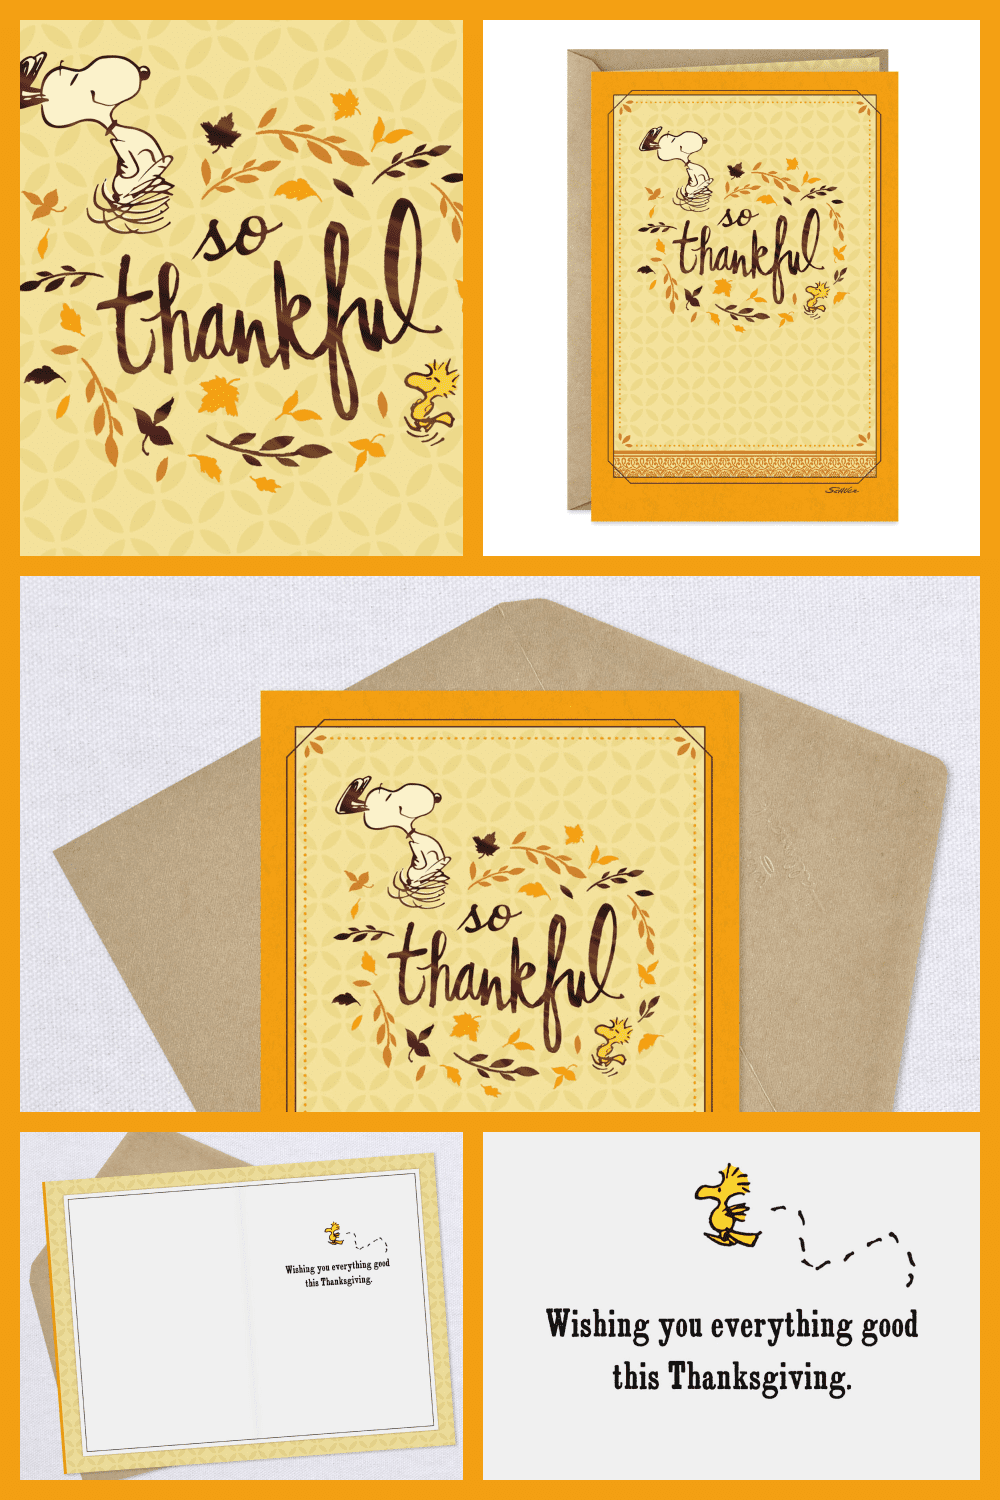 Peanuts snoopy and woodstock so thankful Thanksgiving card.